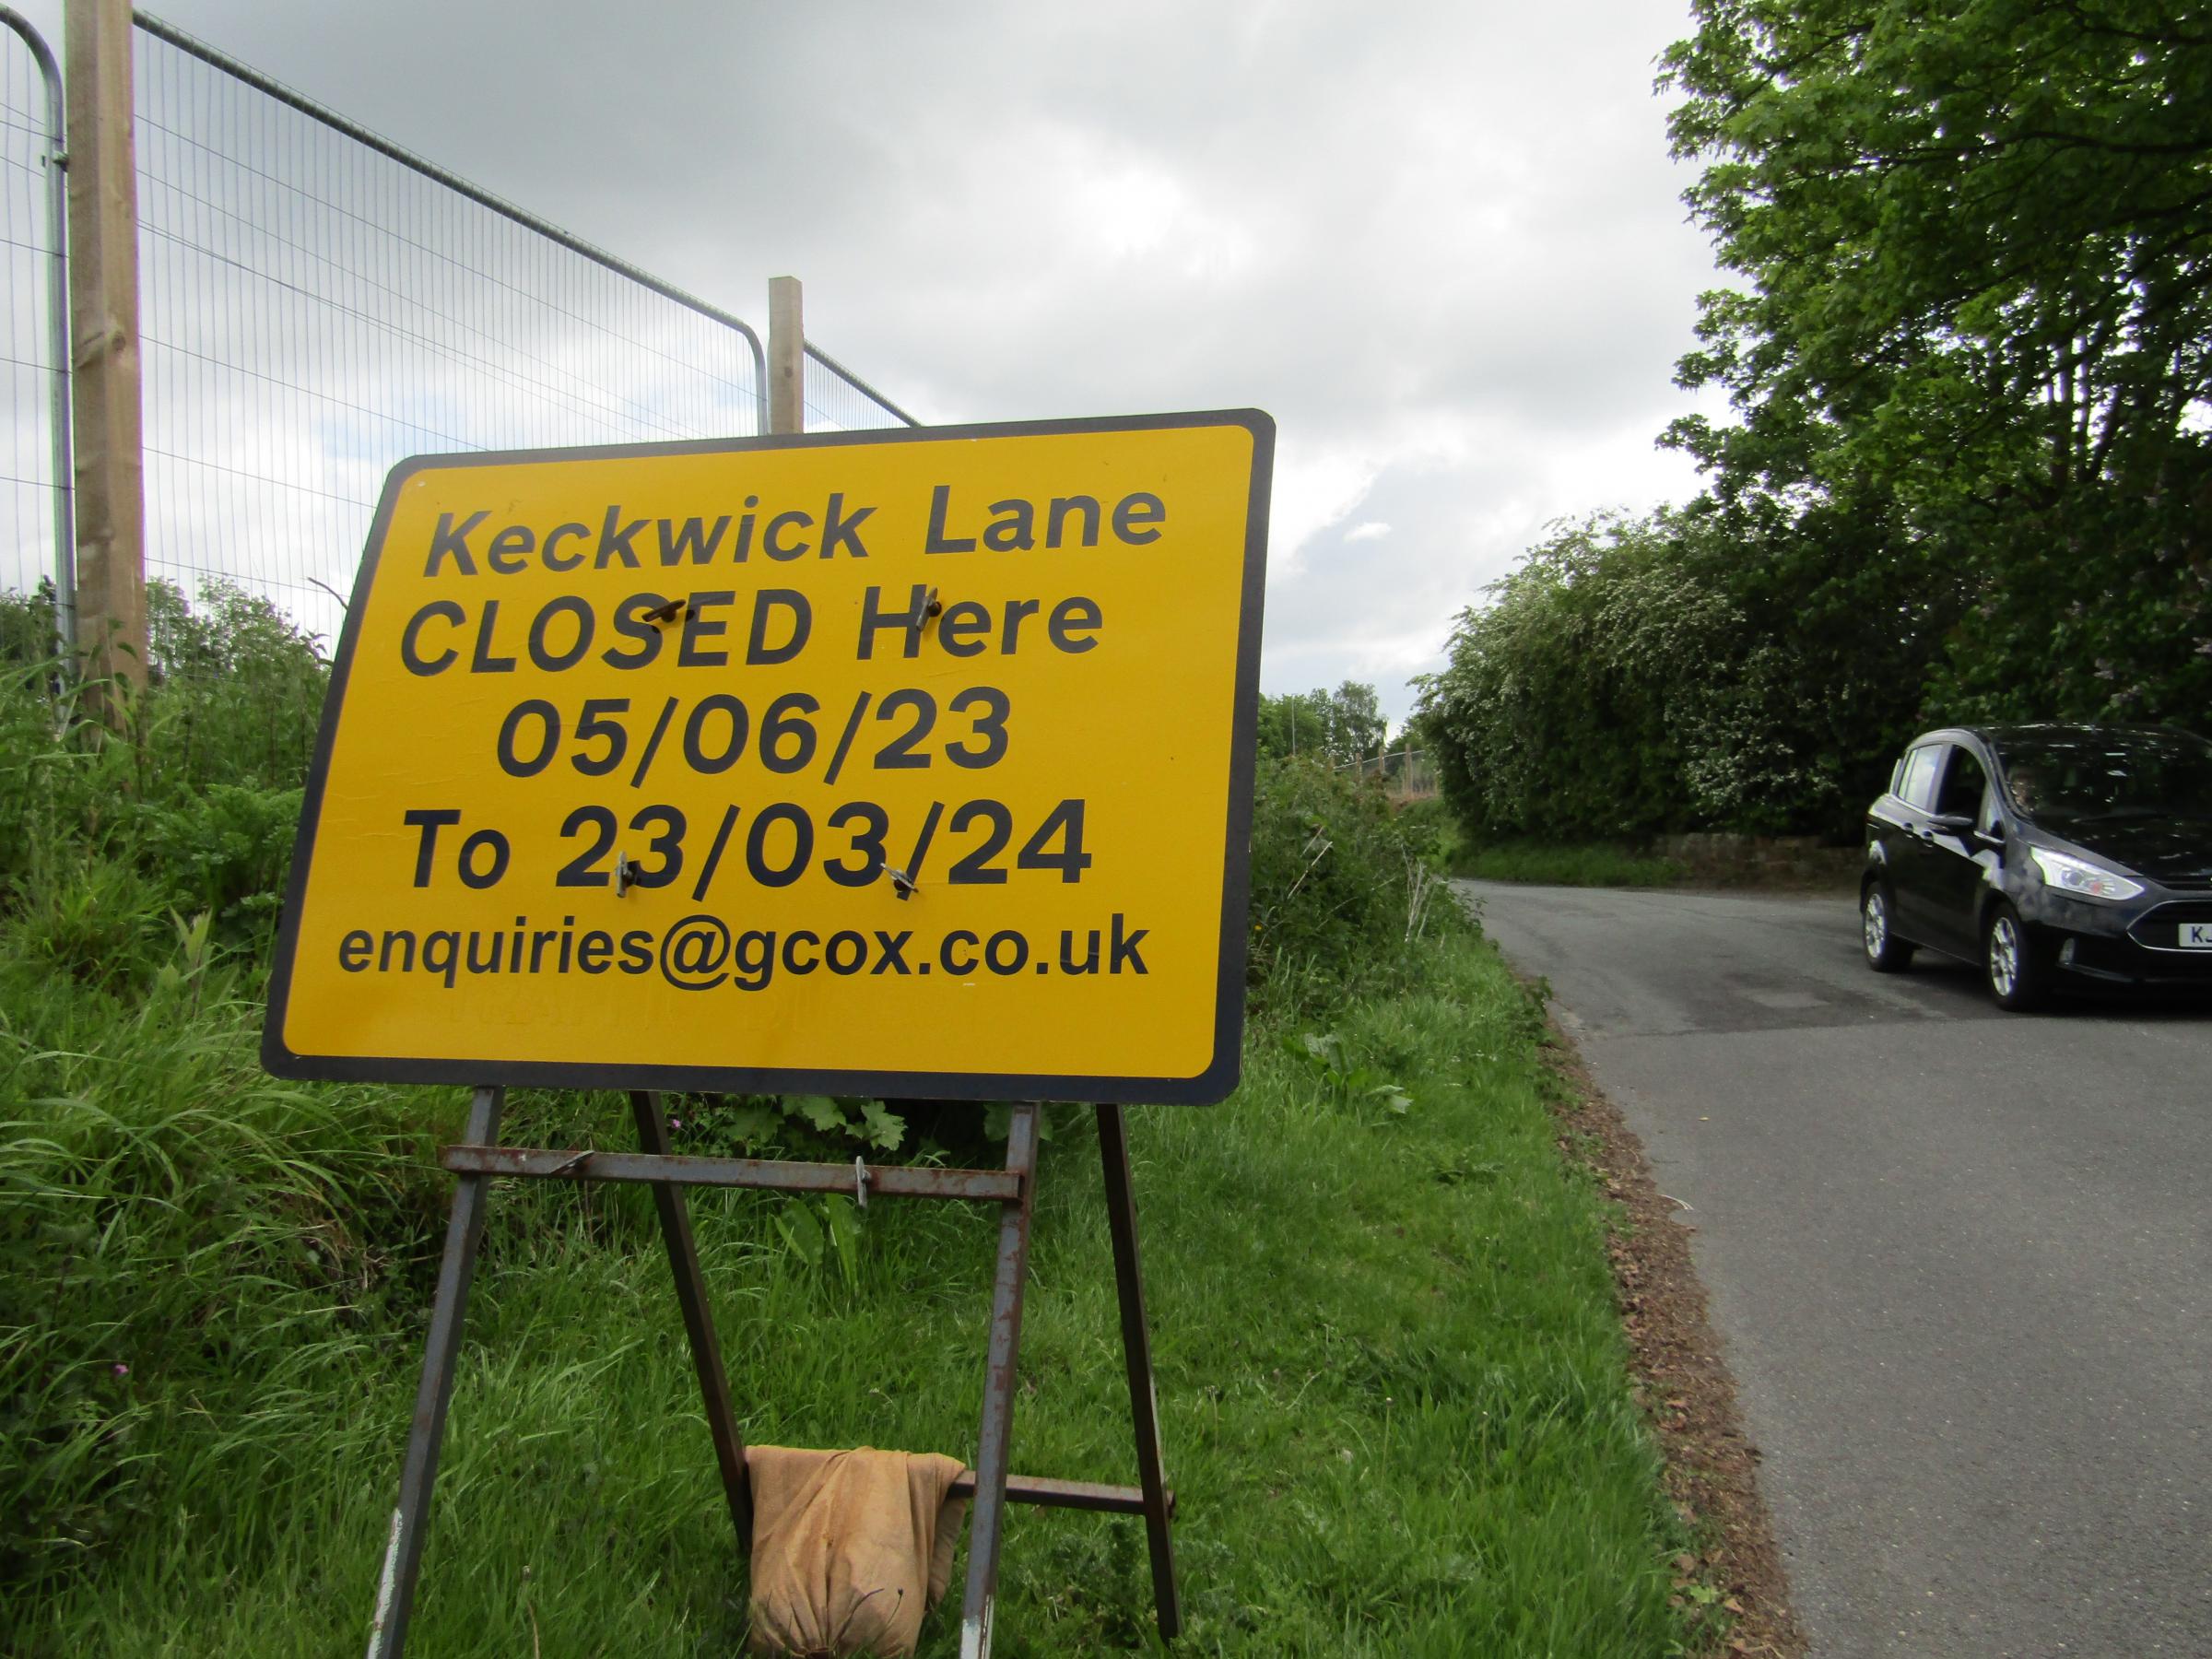 Keckwick Lane is also due to be closed